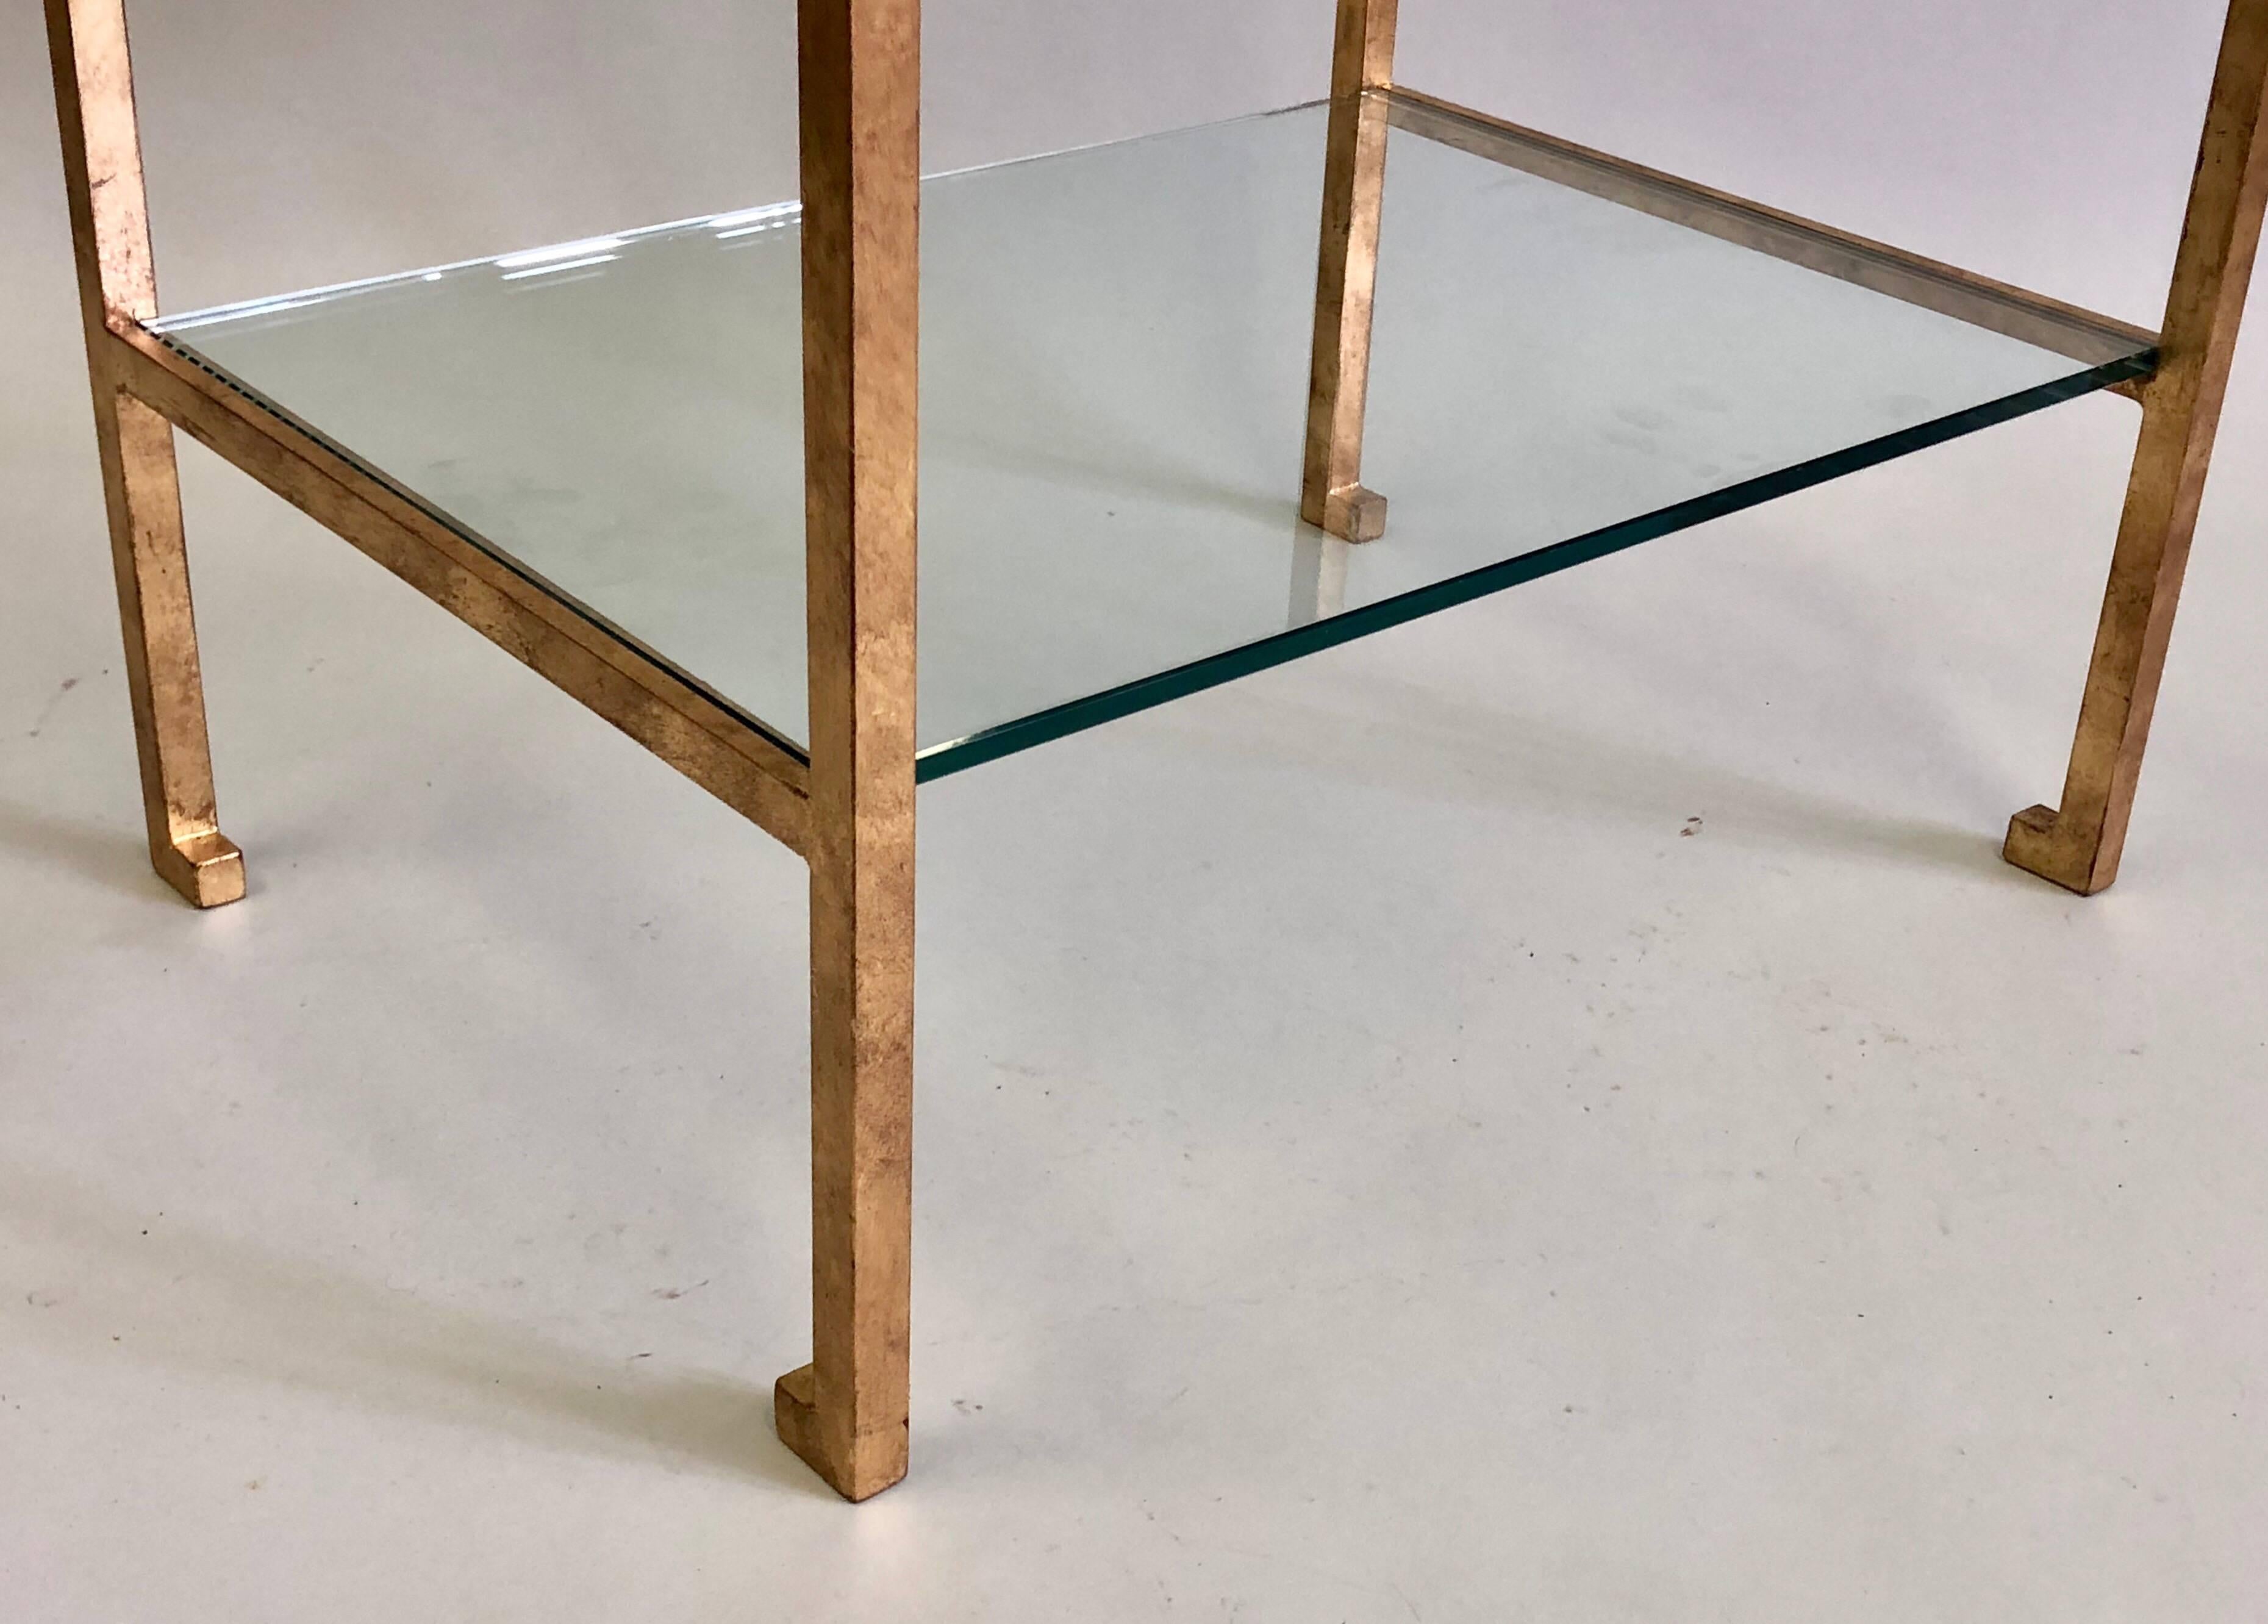 Pair of French Mid-Century Modern Gilt Iron Side / End Tables by Maison Ramsay For Sale 3